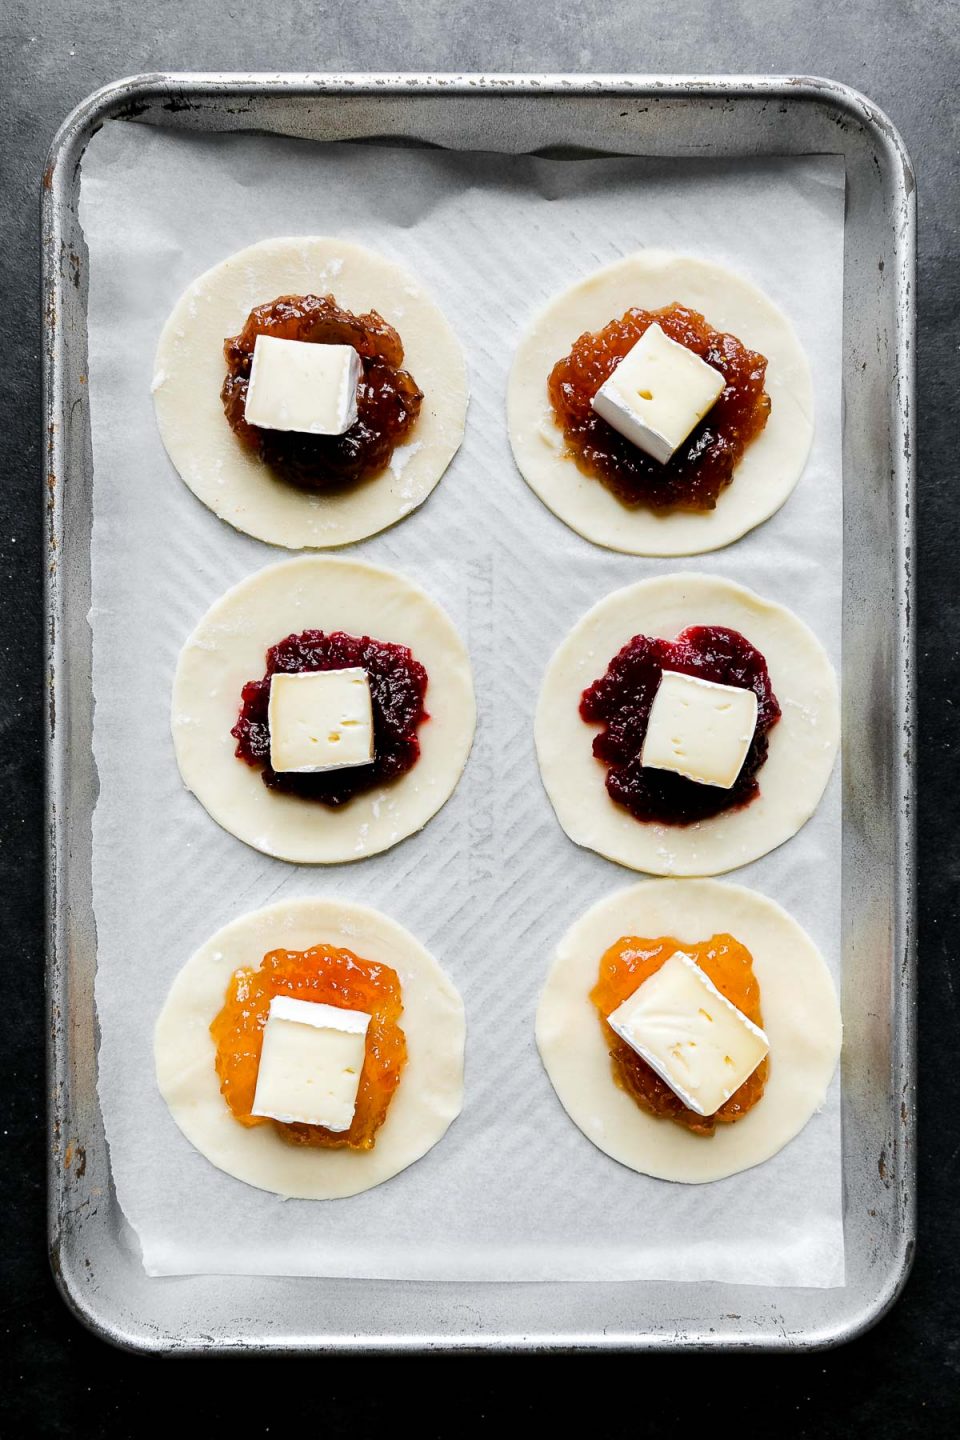 Six 3-inch circles cut out of puff pastry arranged on an aluminum baking sheet lined with parchment paper. Each puff pastry circle has about 1/2 teaspoon of jam or preserve placed in the center with a 1/2-inch piece of brie cheese placed on top to start forming Mini Baked Brie Bites. The baking sheet sits atop a dark textured surface.